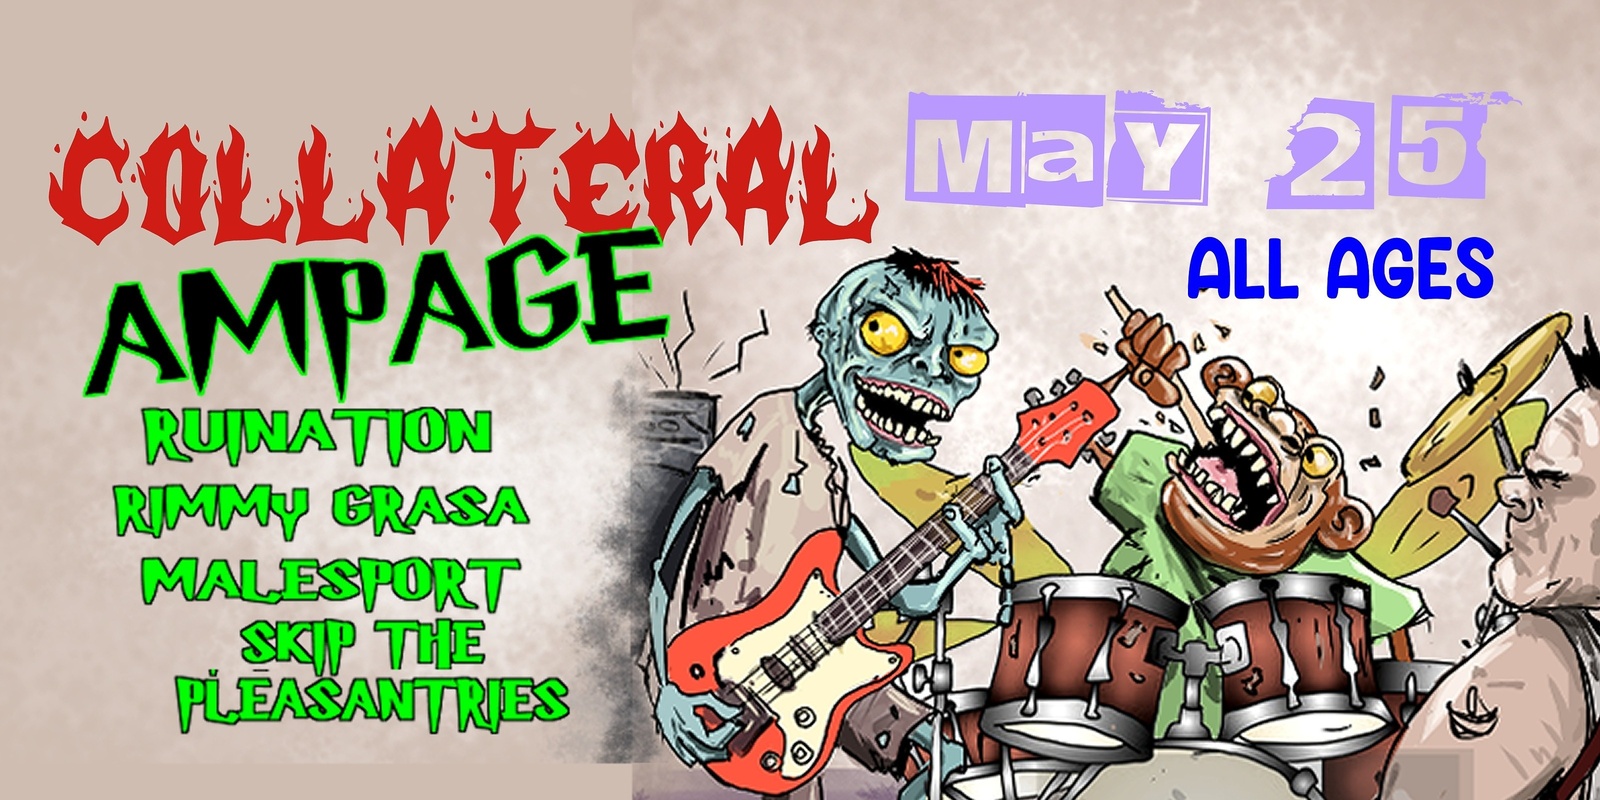 Banner image for COLLATERAL AMPAGE